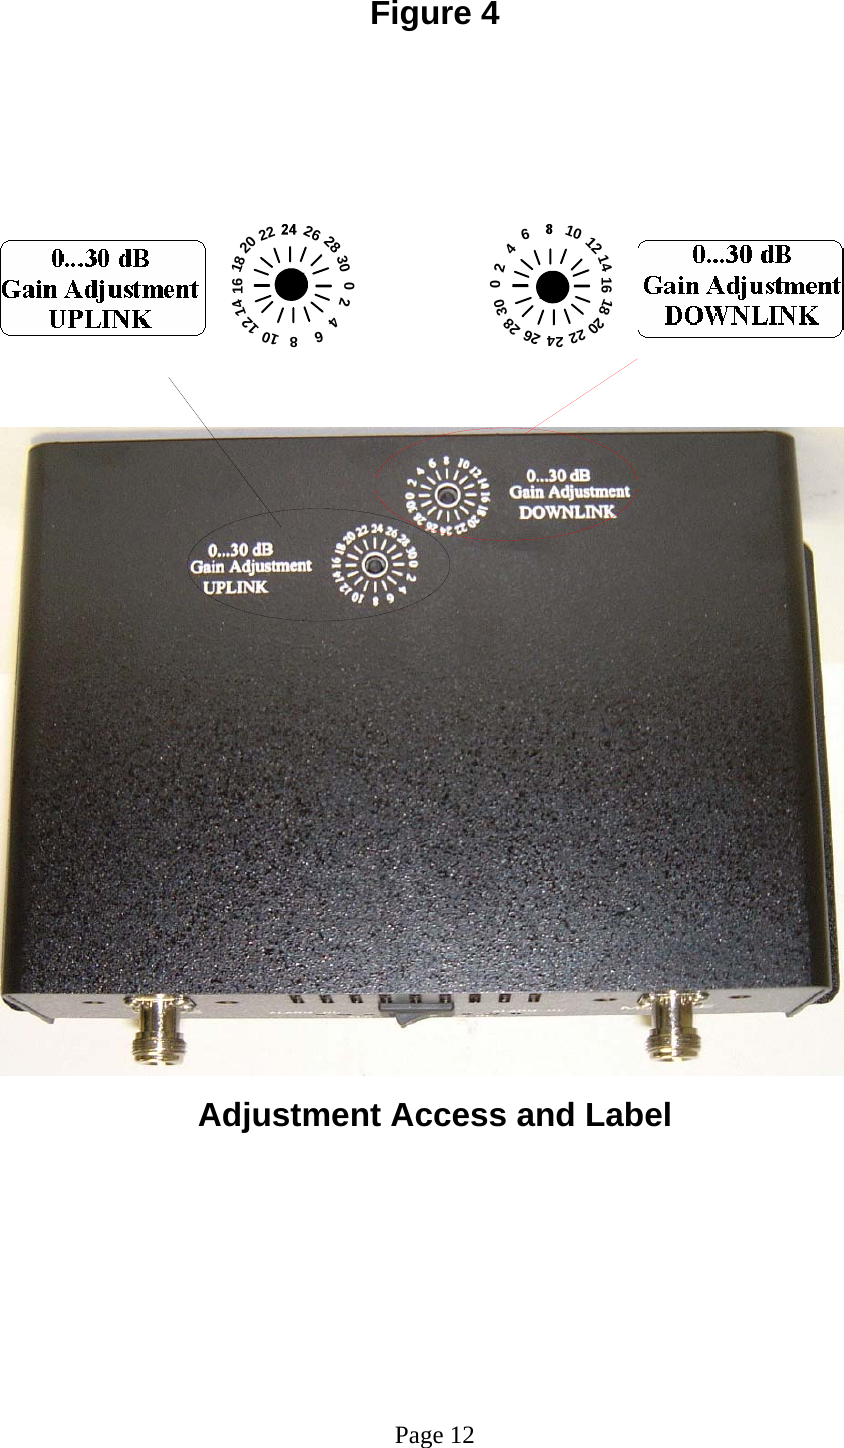  Figure 4                                                                Adjustment Access and Label           Page 12 001621413641210820222426280301664212101418202226288